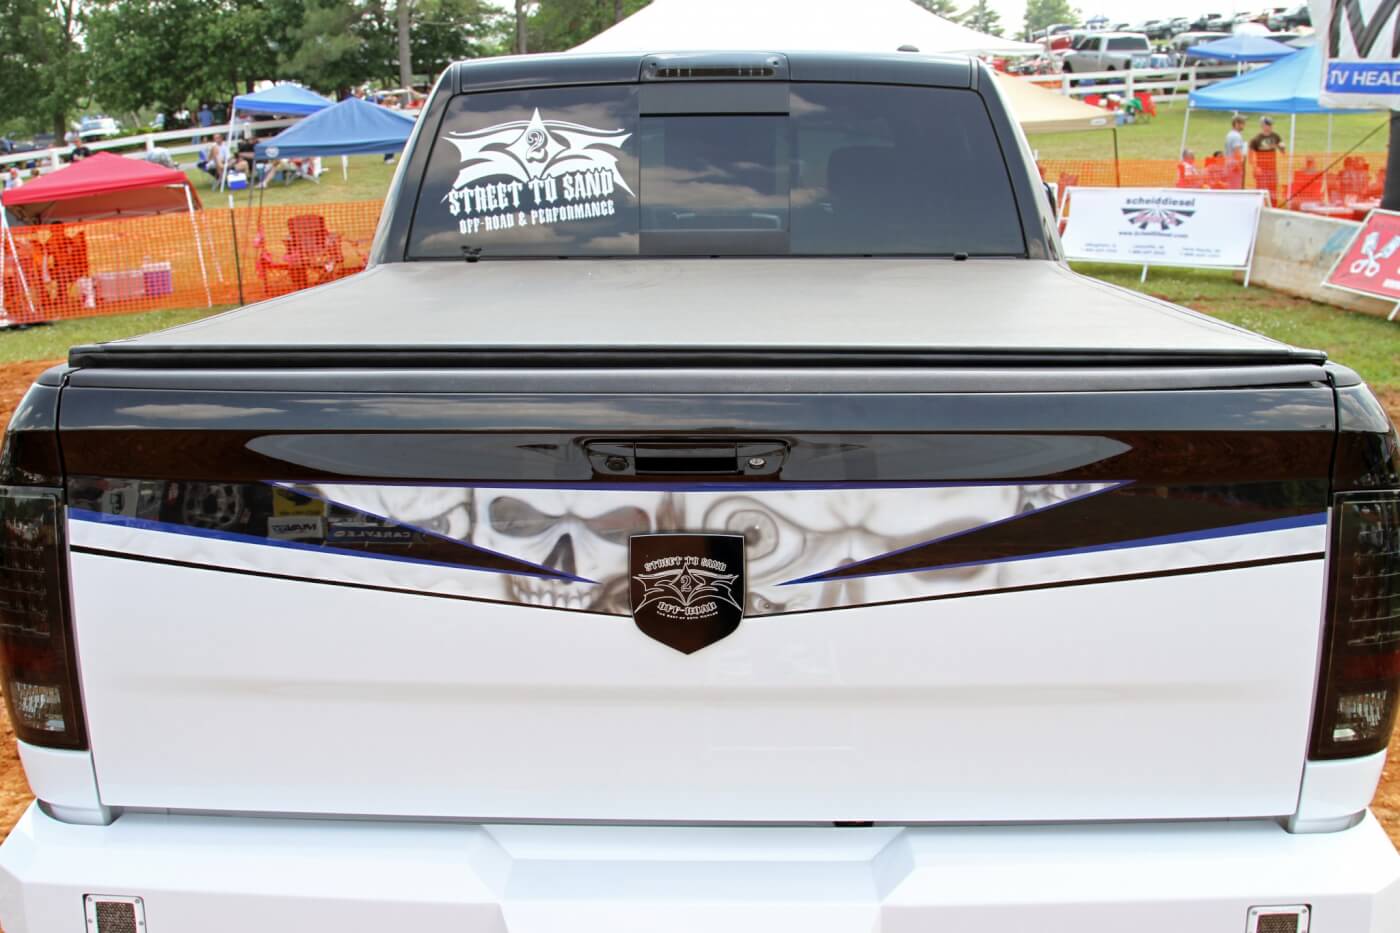 An Extang soft tonneau cover keeps marketing swag and product displays protected from the elements while the truck travels from event to event. Recon smoked LED taillights and third brake light flow well with the custom graphics and theme of the truck.